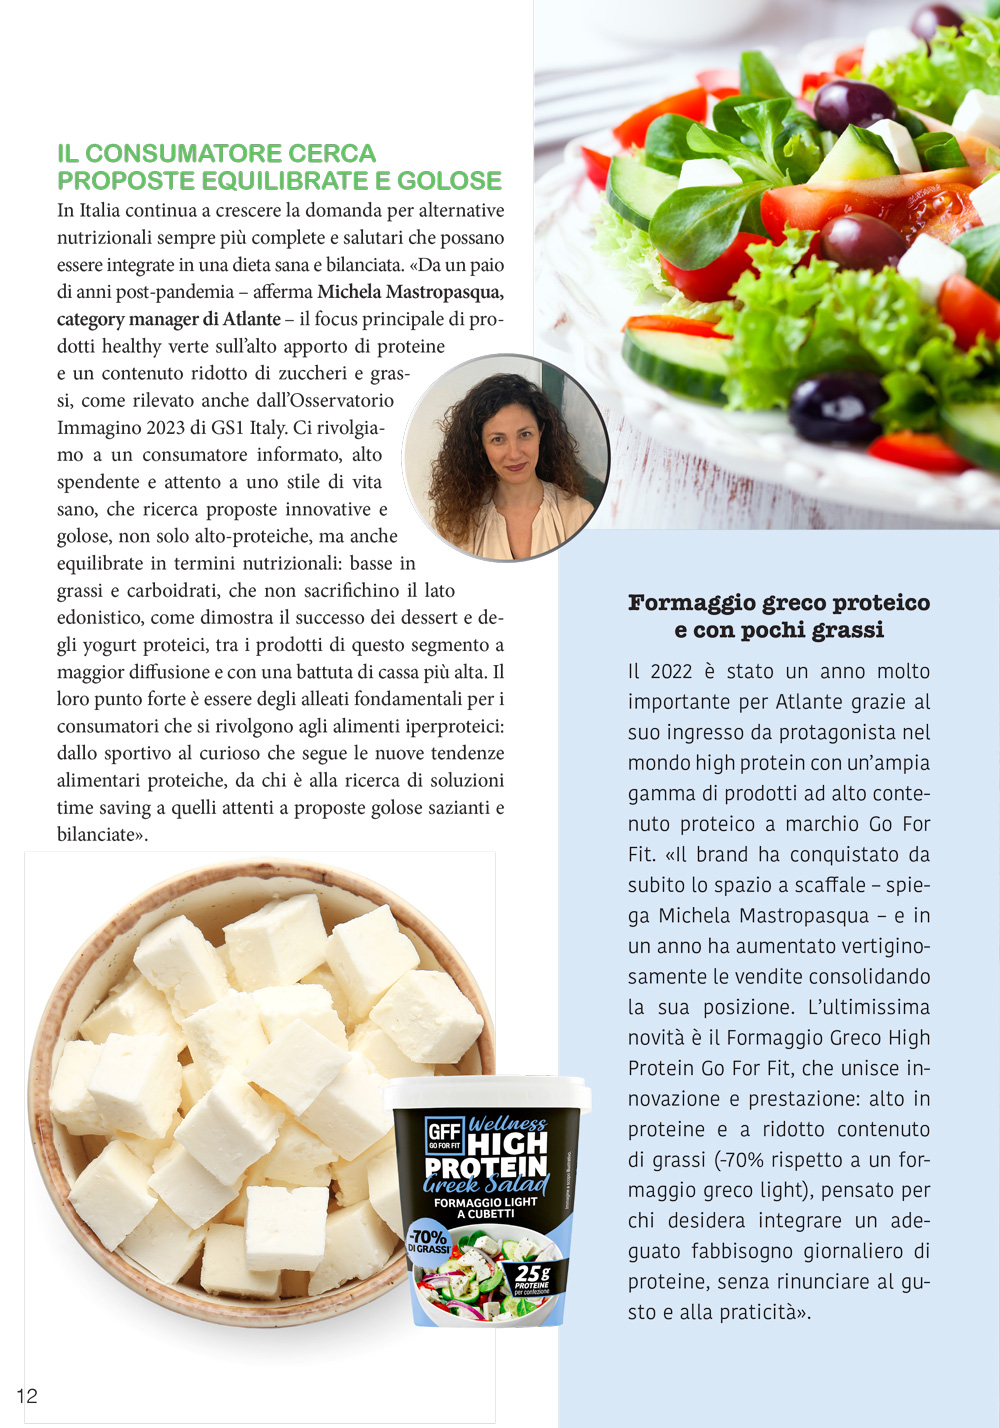 Formaggio-proteico-hight-protein-go-for-fit-DM-magazine